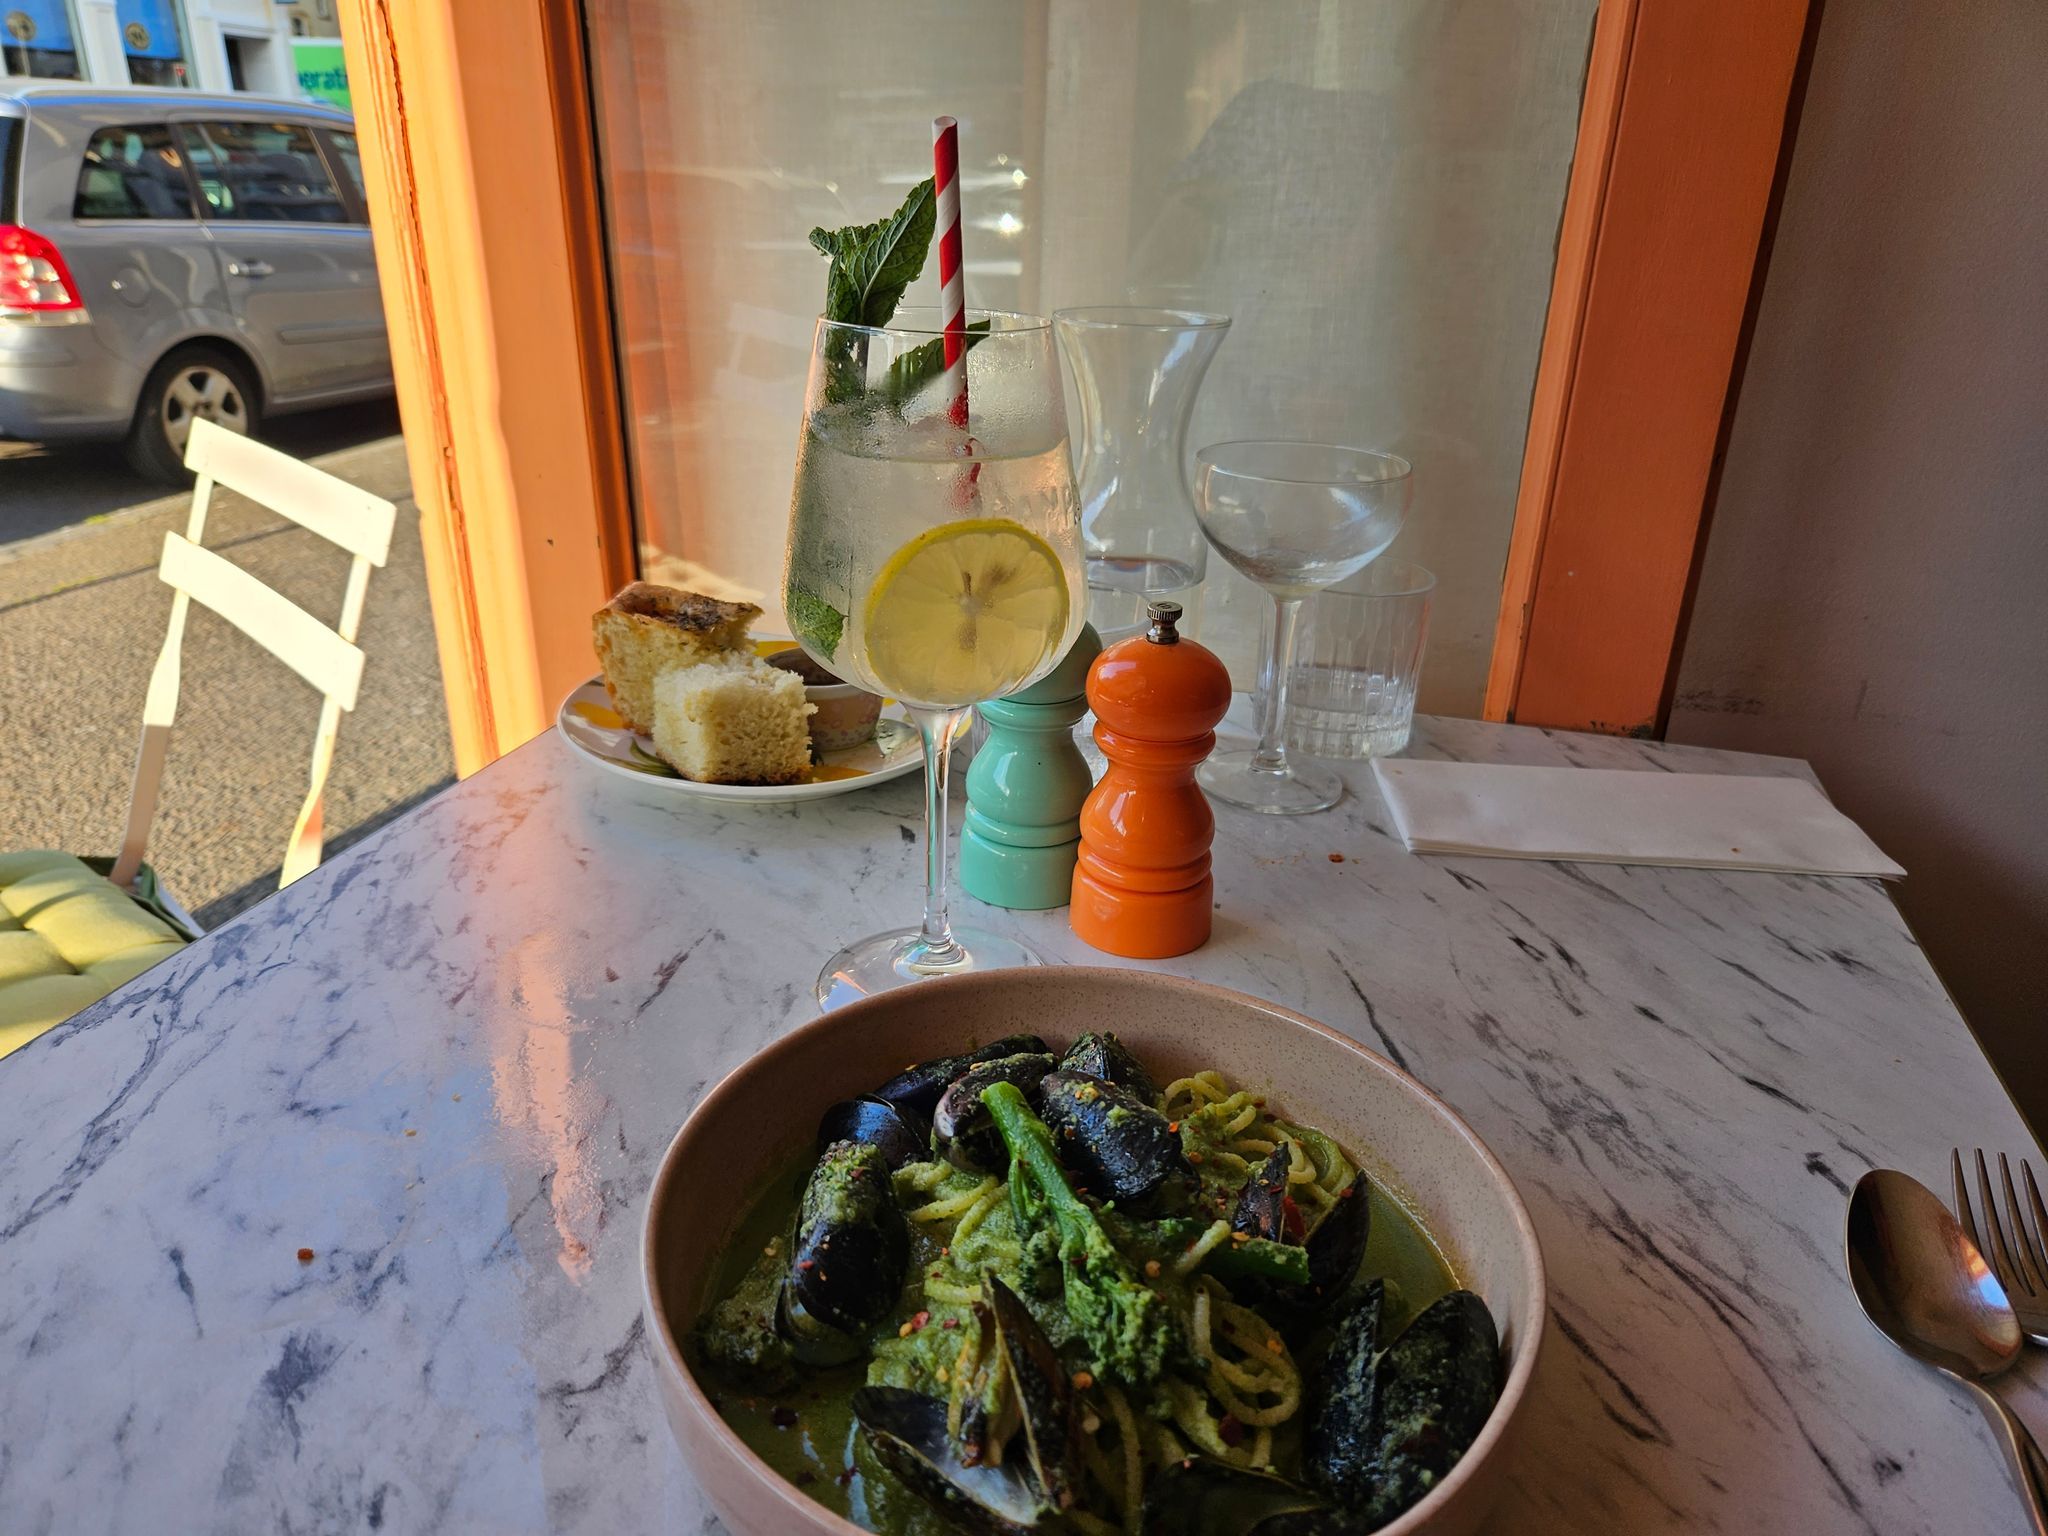 Spaghetti Alle Cozze, handmade pasta tossed with broccoletti, chilli and fresh Sussex mussels. A taste of Italy